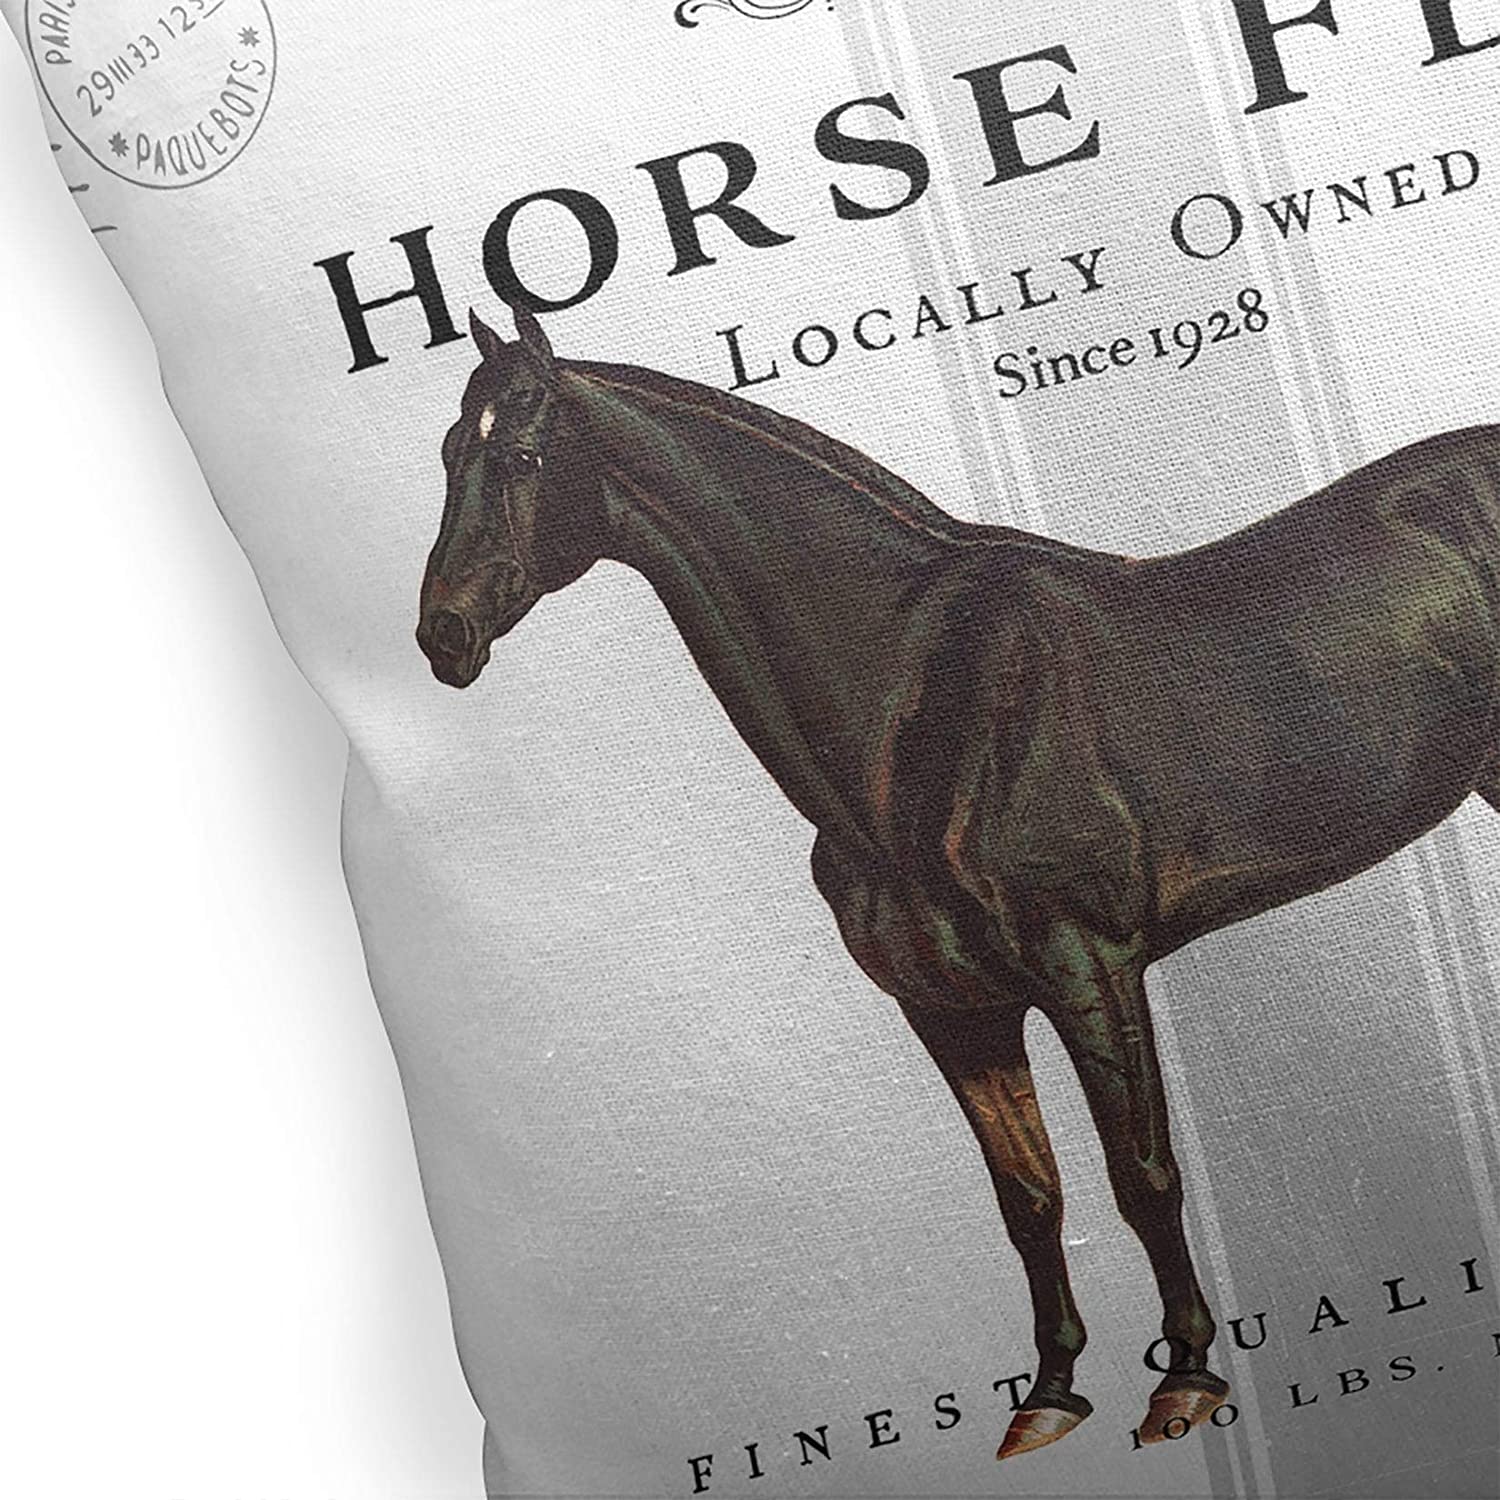 MISC Horse Feed Two Indoor|Outdoor Pillow by 18x18 Grey Geometric Farmhouse Polyester Removable Cover